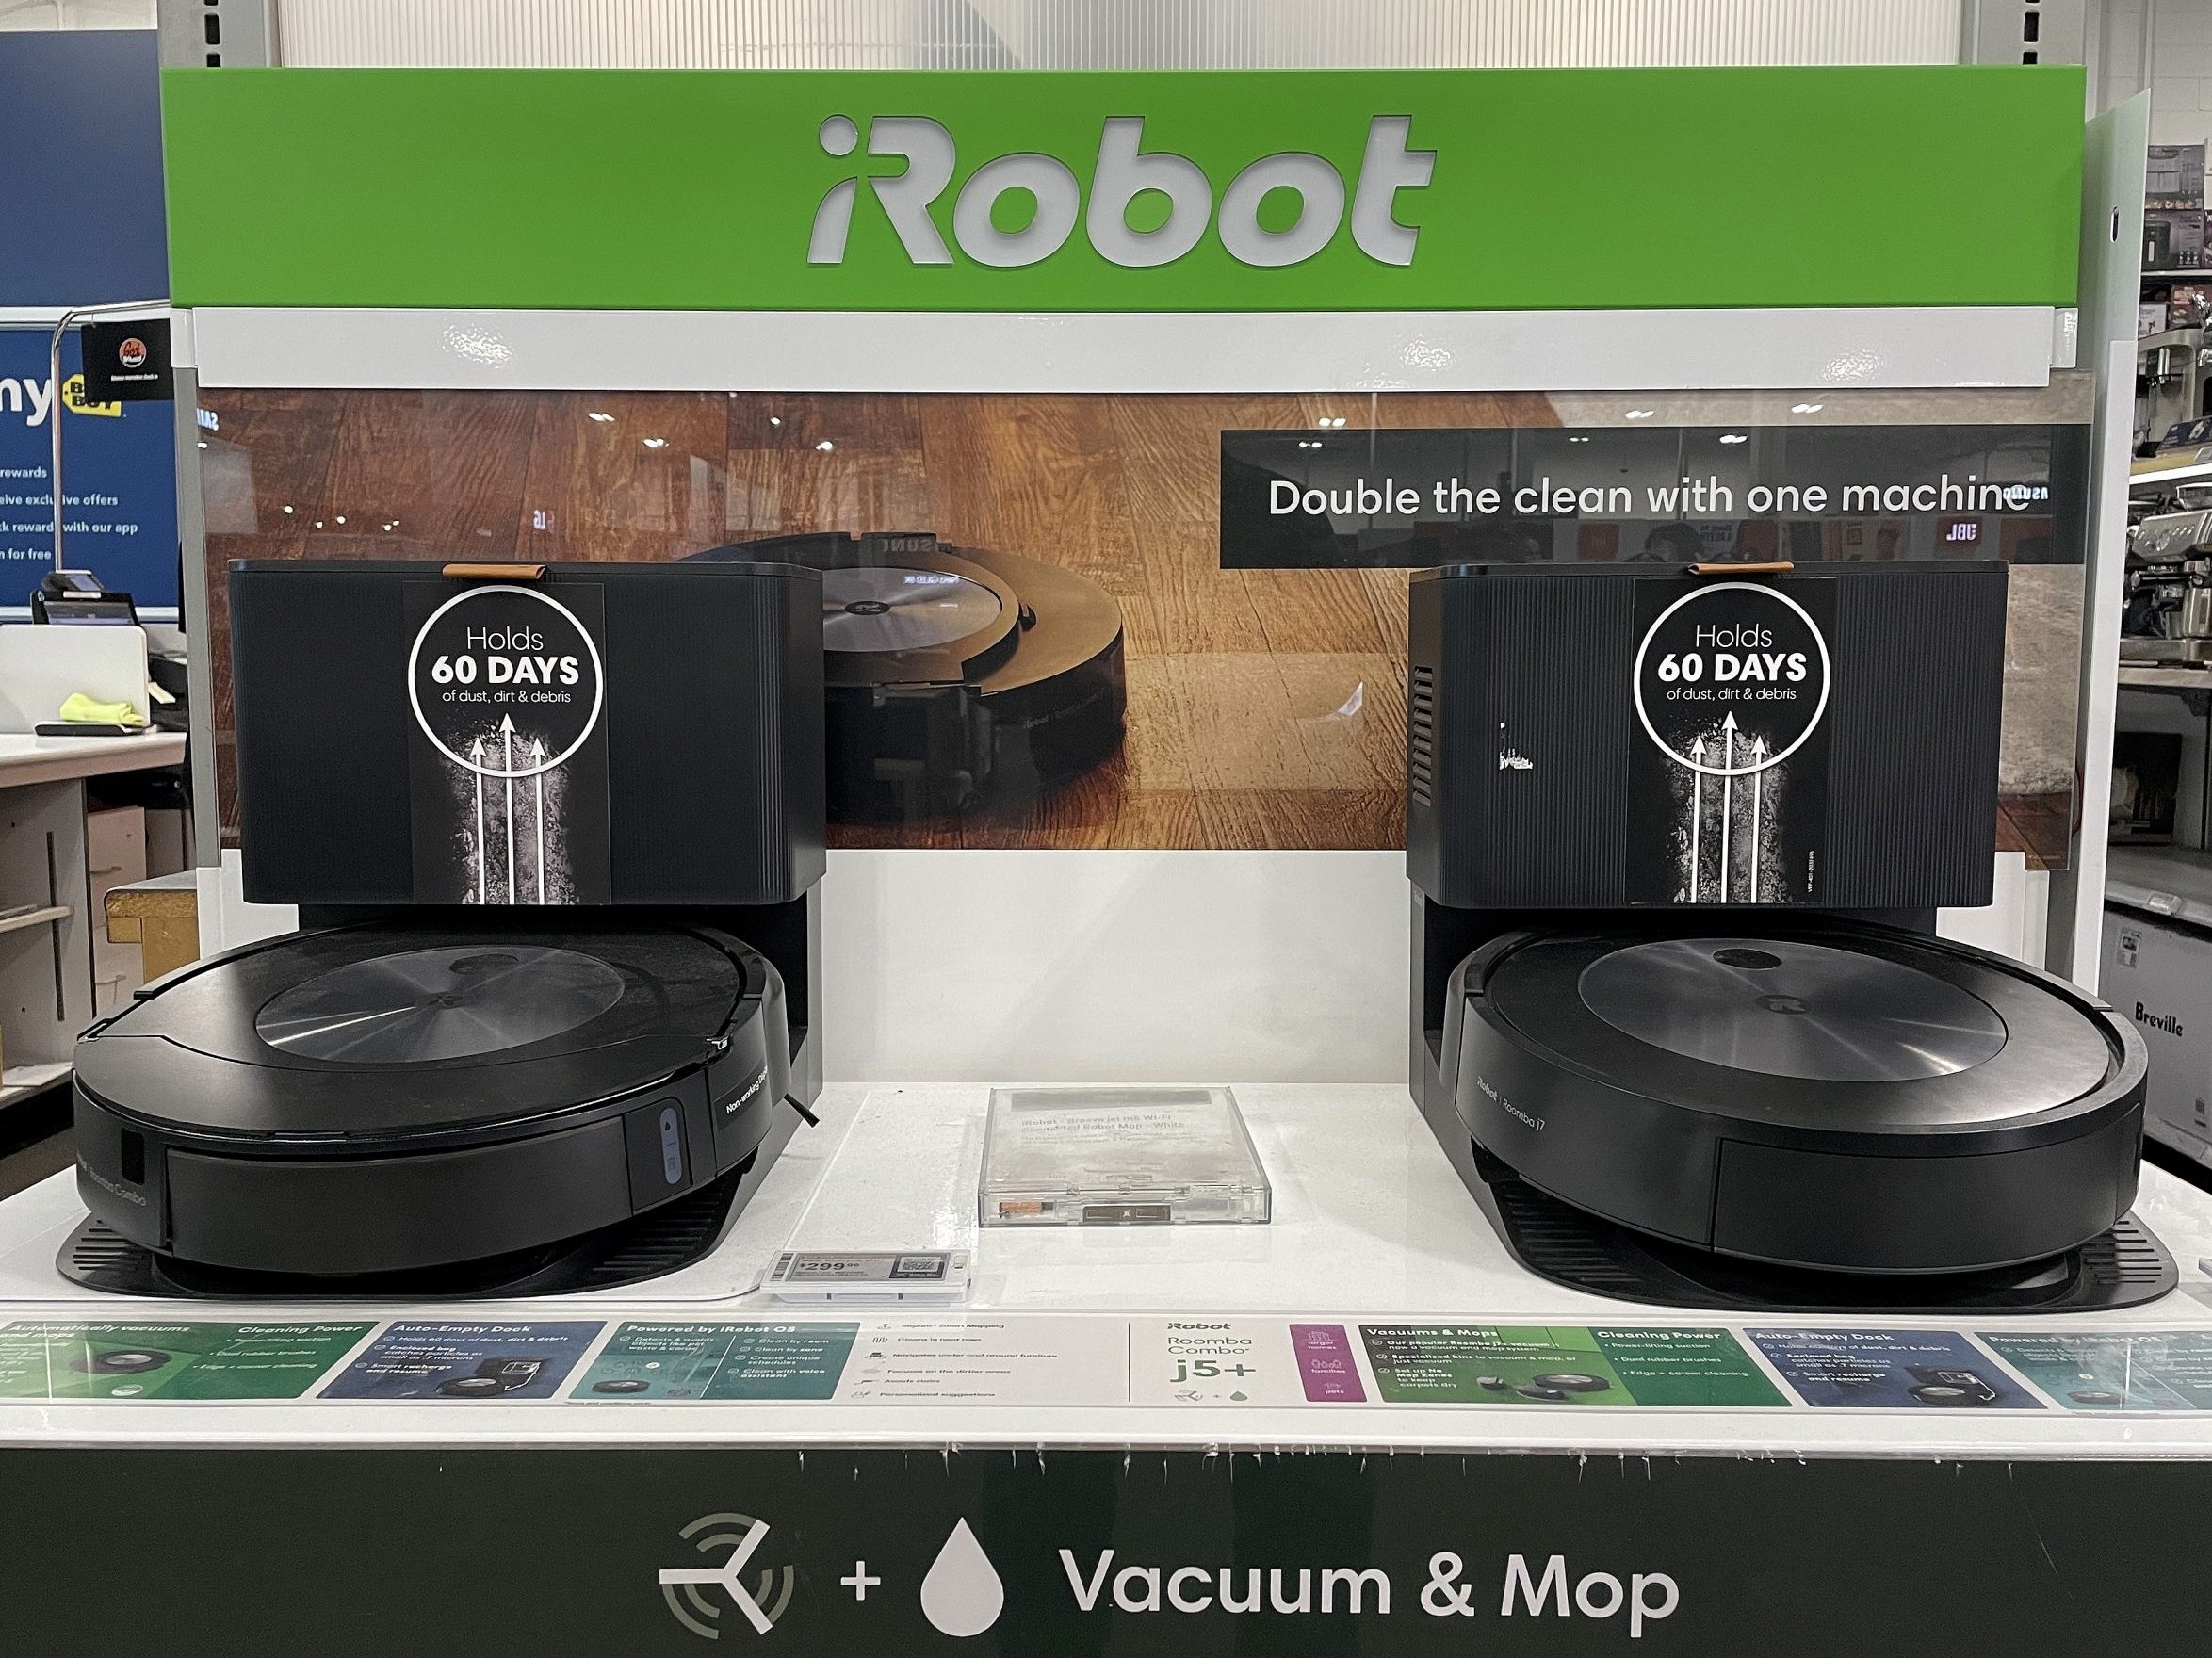 Exclusive:  to win unconditional EU nod for iRobot deal